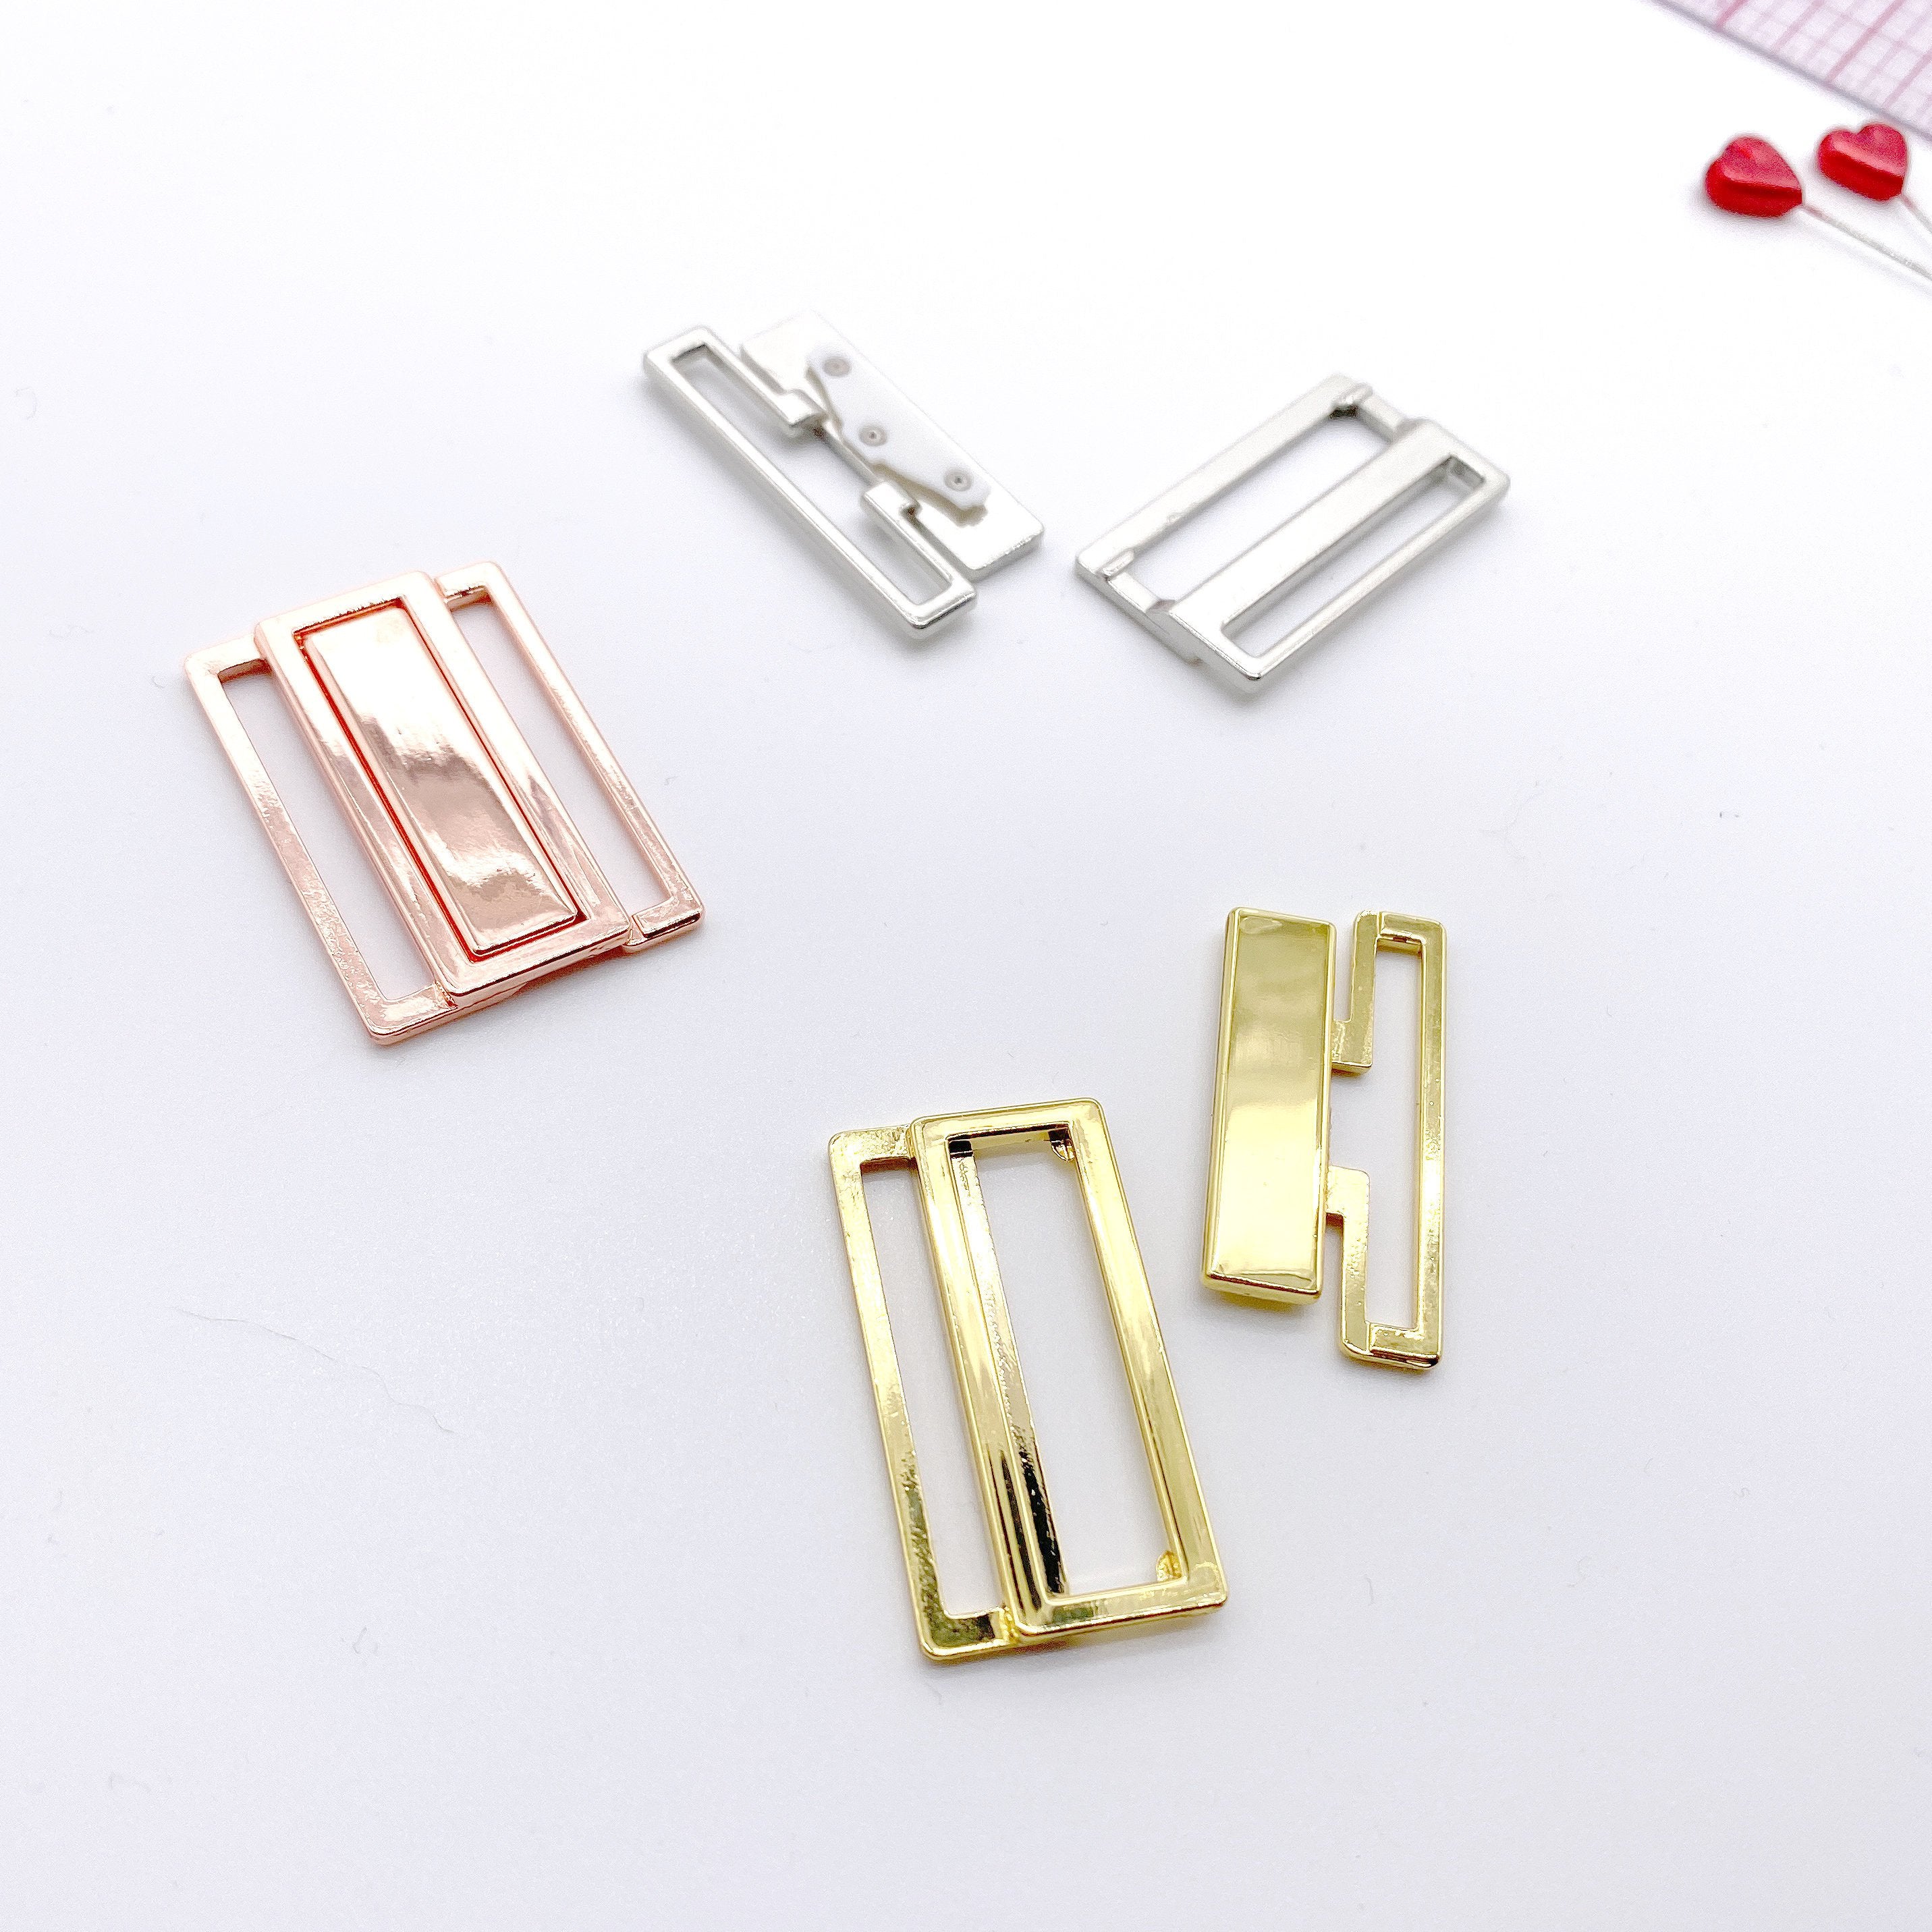 1 1/8" (30mm) Slim Metal Front Closures - Silver, Rose Gold or Gold for Bra, Swimwear and Lingerie - Stitch Love Studio